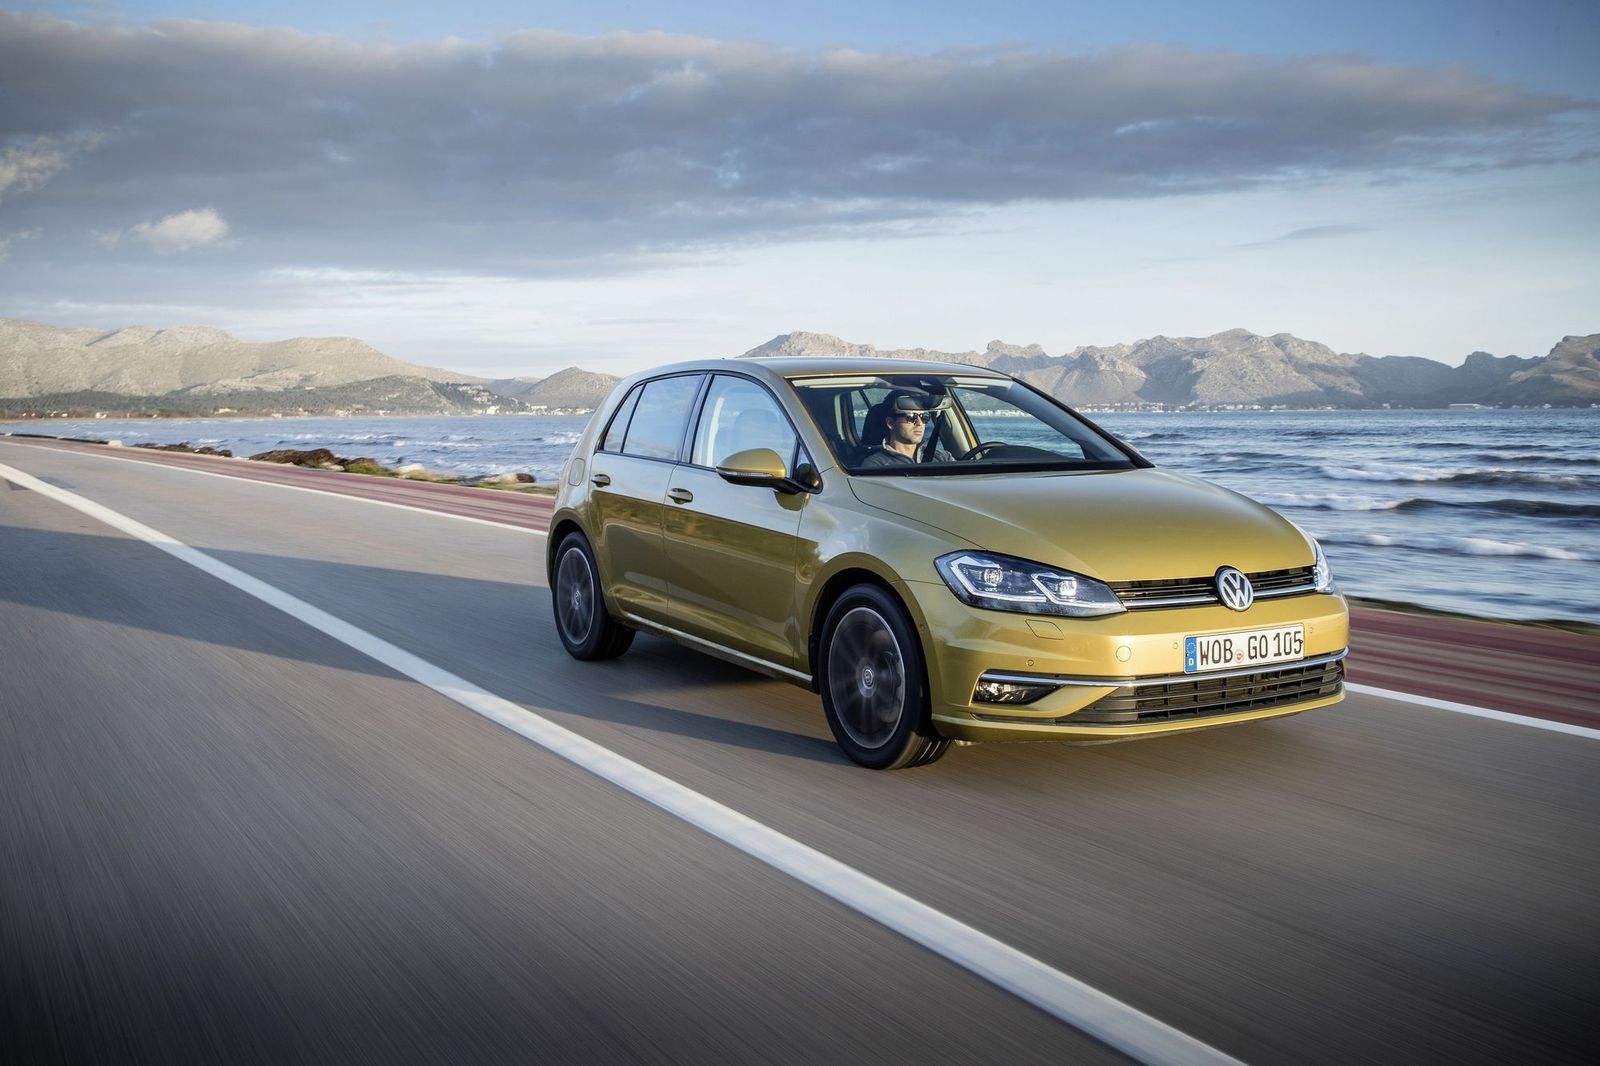 New 1.5 TSI 130PS engine VW Golf shows the combustion tech | DriveMag Cars